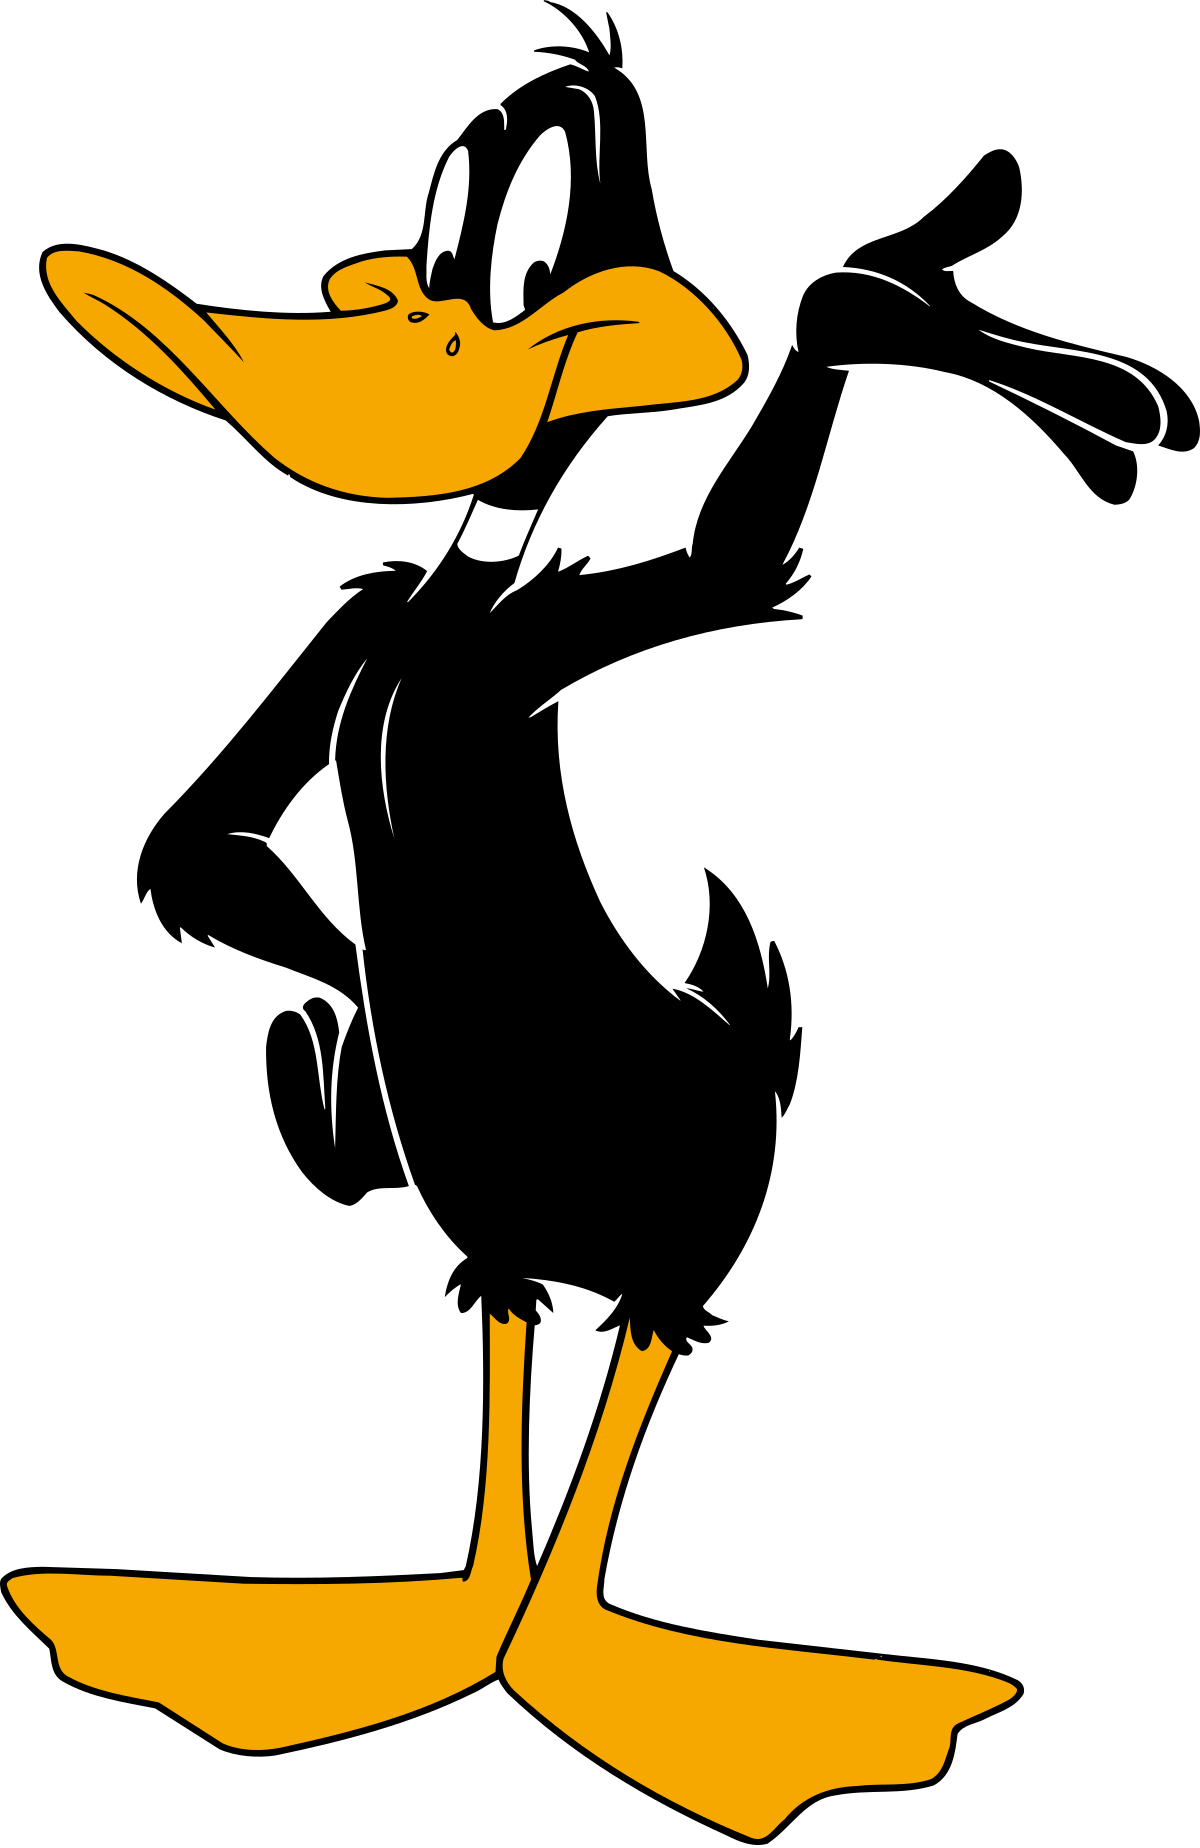 Daffy wikipedia . Clipart duck side view